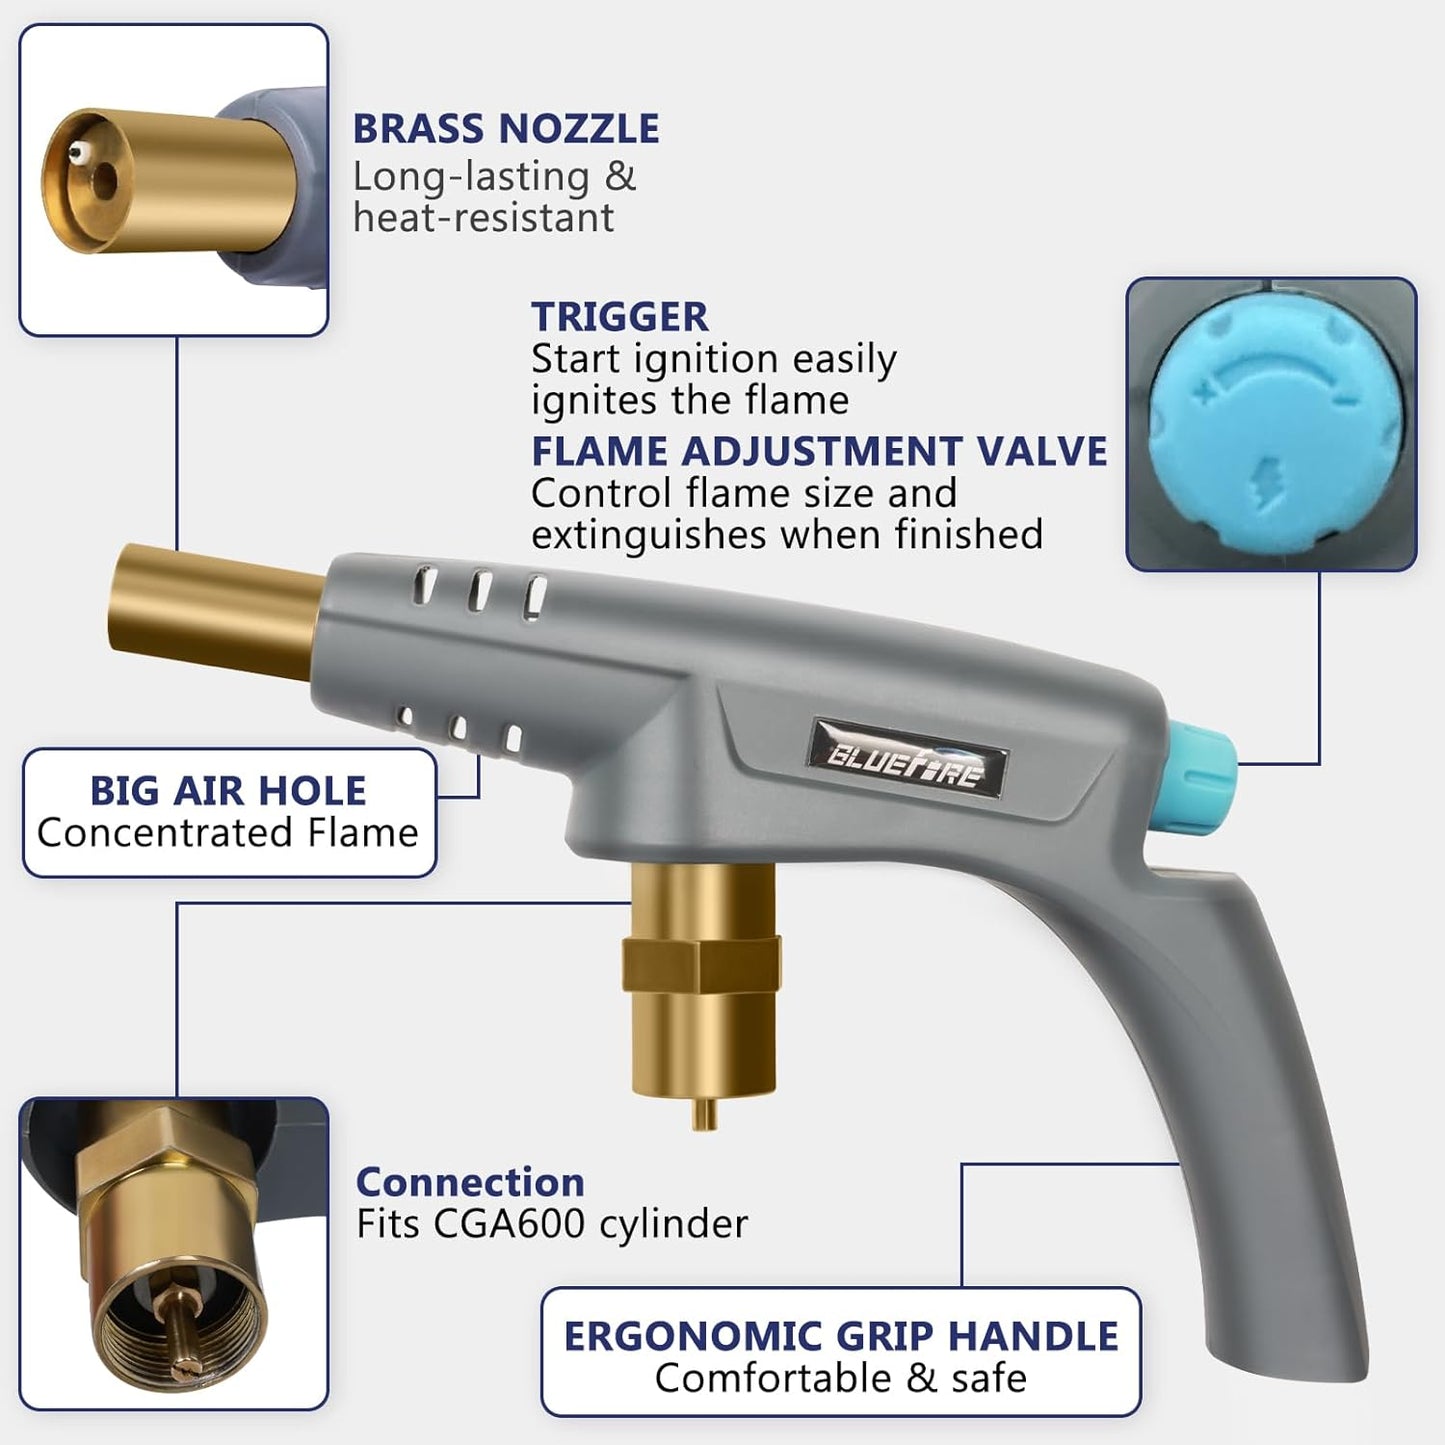 BLUEFIRE Powerful Propane Torch Head, Trigger Start Mapp Gas Turbo Torch Map Gas Torch Kit with Adjust Flame, Grill Gun Torch for Soldering Cooking Welding brazing Fuel by MAPP, MAP/PRO